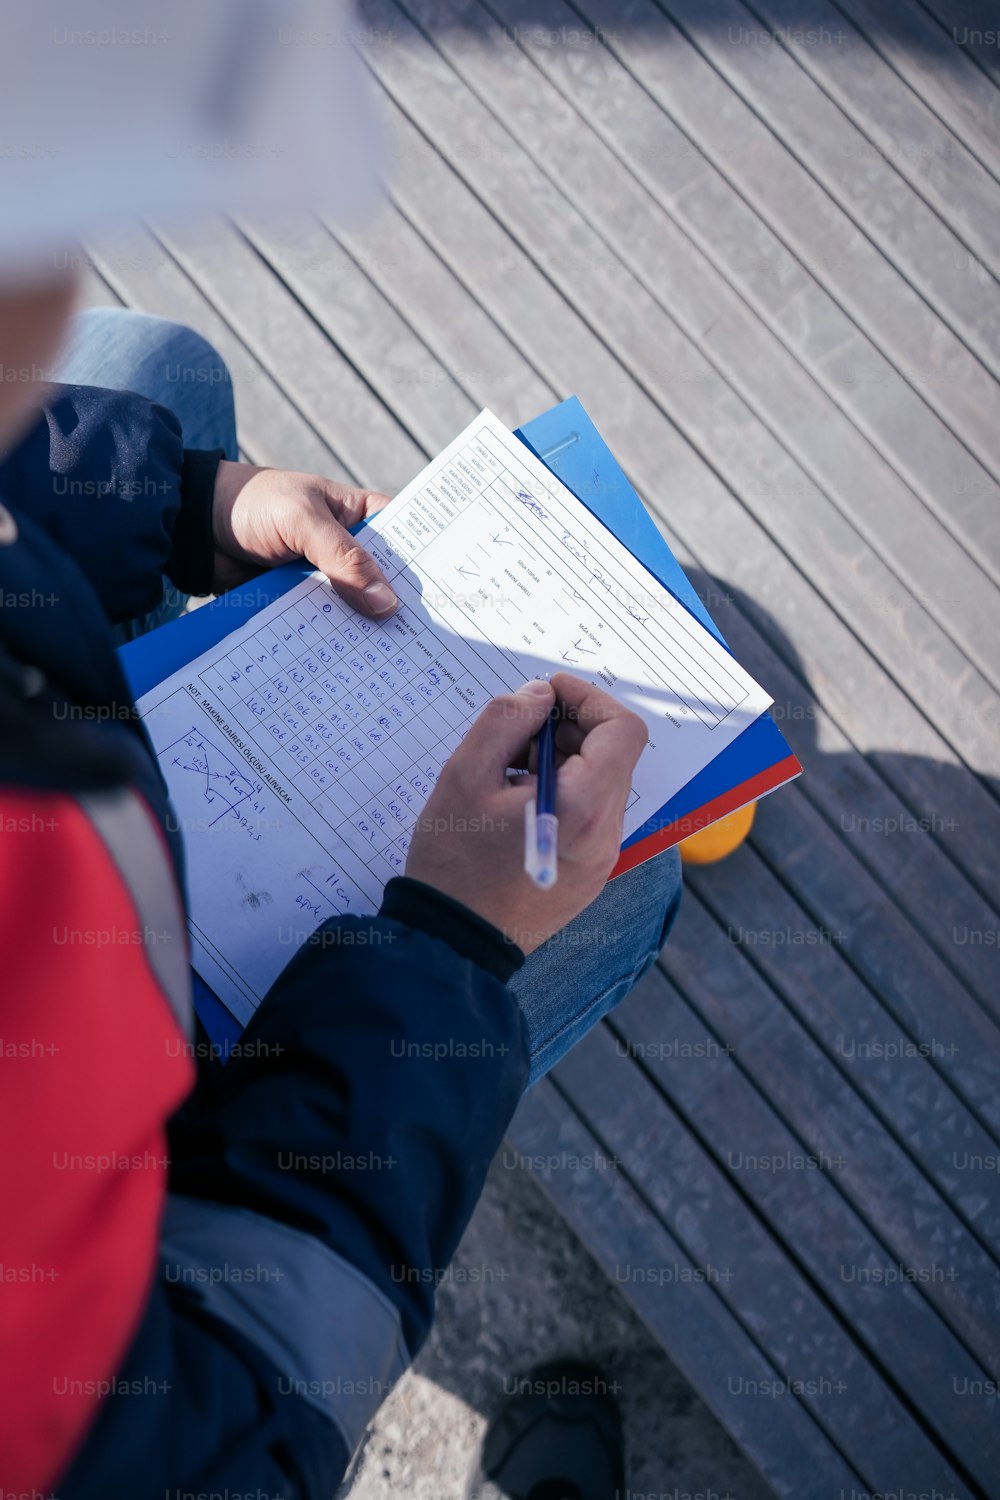 a person sitting on a bench writing on a piece of paper